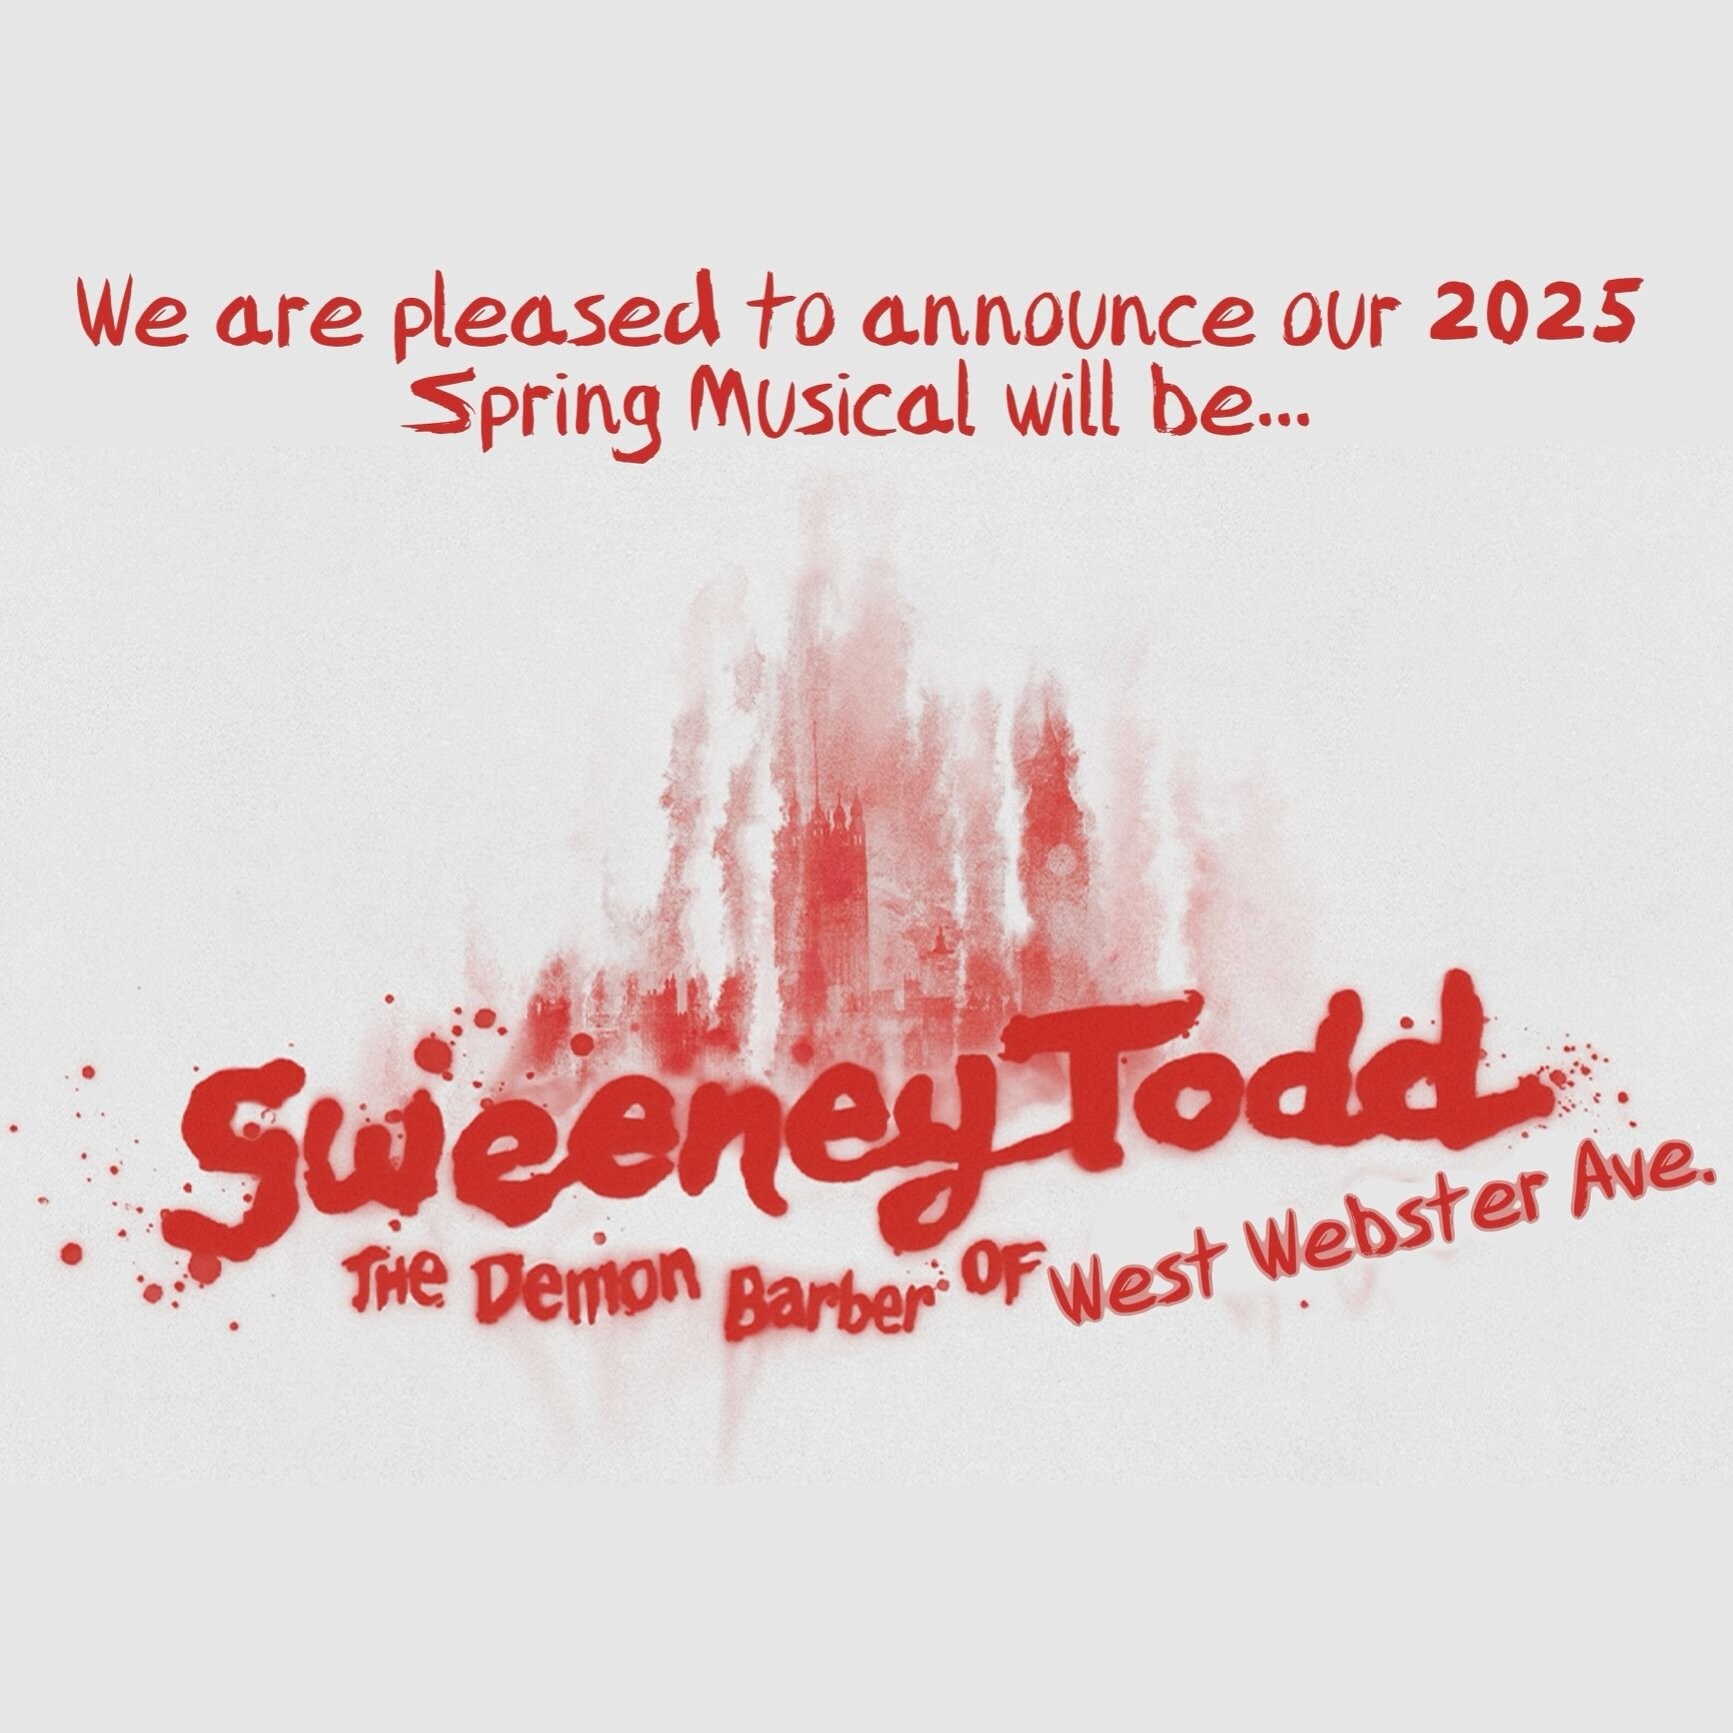 My Friends! We could not be more excited to invite you to Attend the Tale of Sweeney Todd in 2025 at RPHS! We can&rsquo;t Wait for you to pull up a barber chair and join us as the Worst Pies in London come to West Webster Ave! More details coming soo